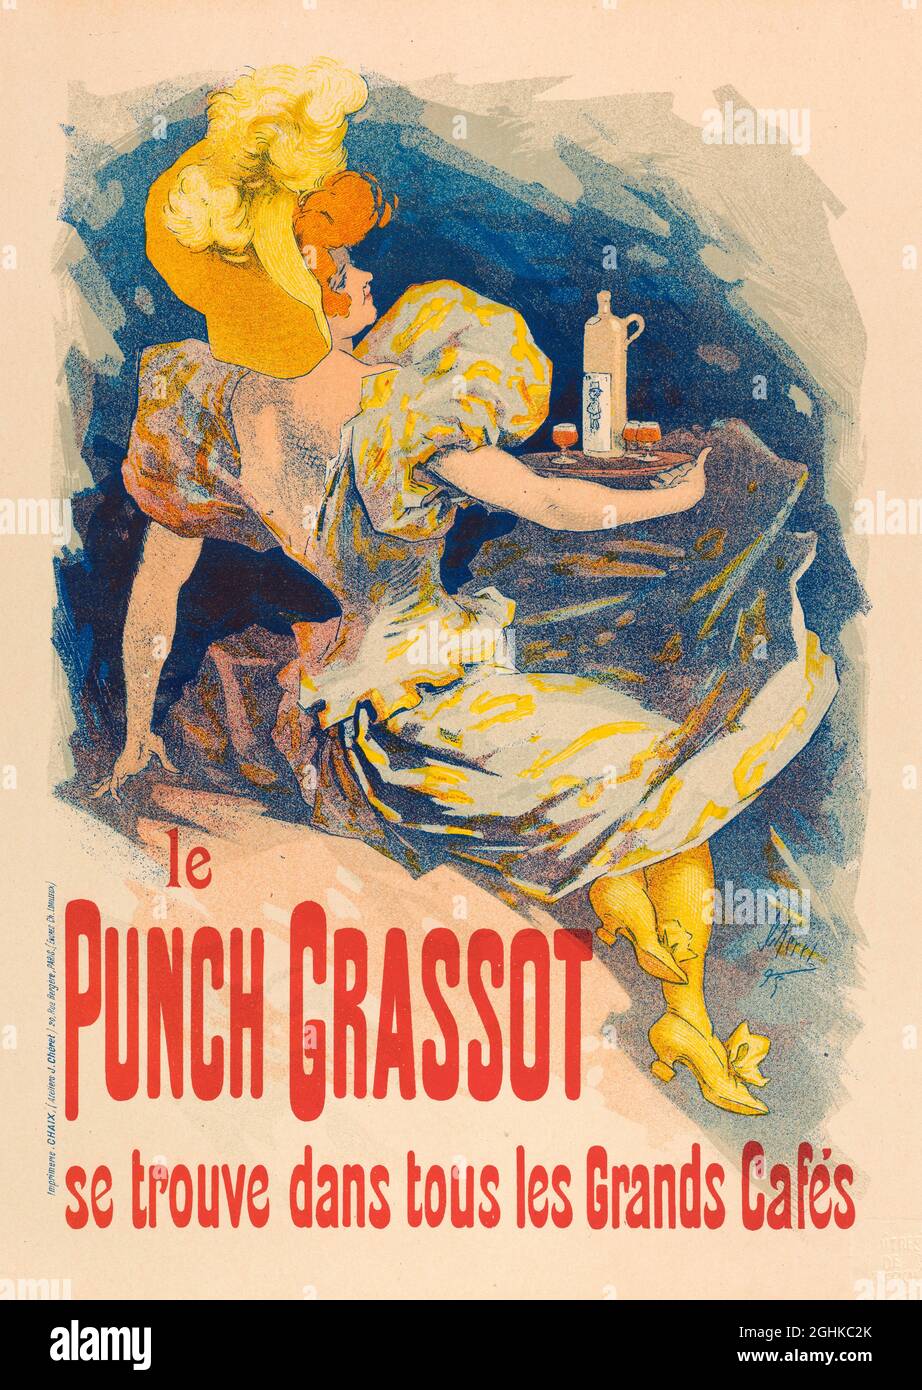 1880s Poster advertising: Punch Grassot can be found in all major cafes by Jules Cheret 1890 Stock Photo